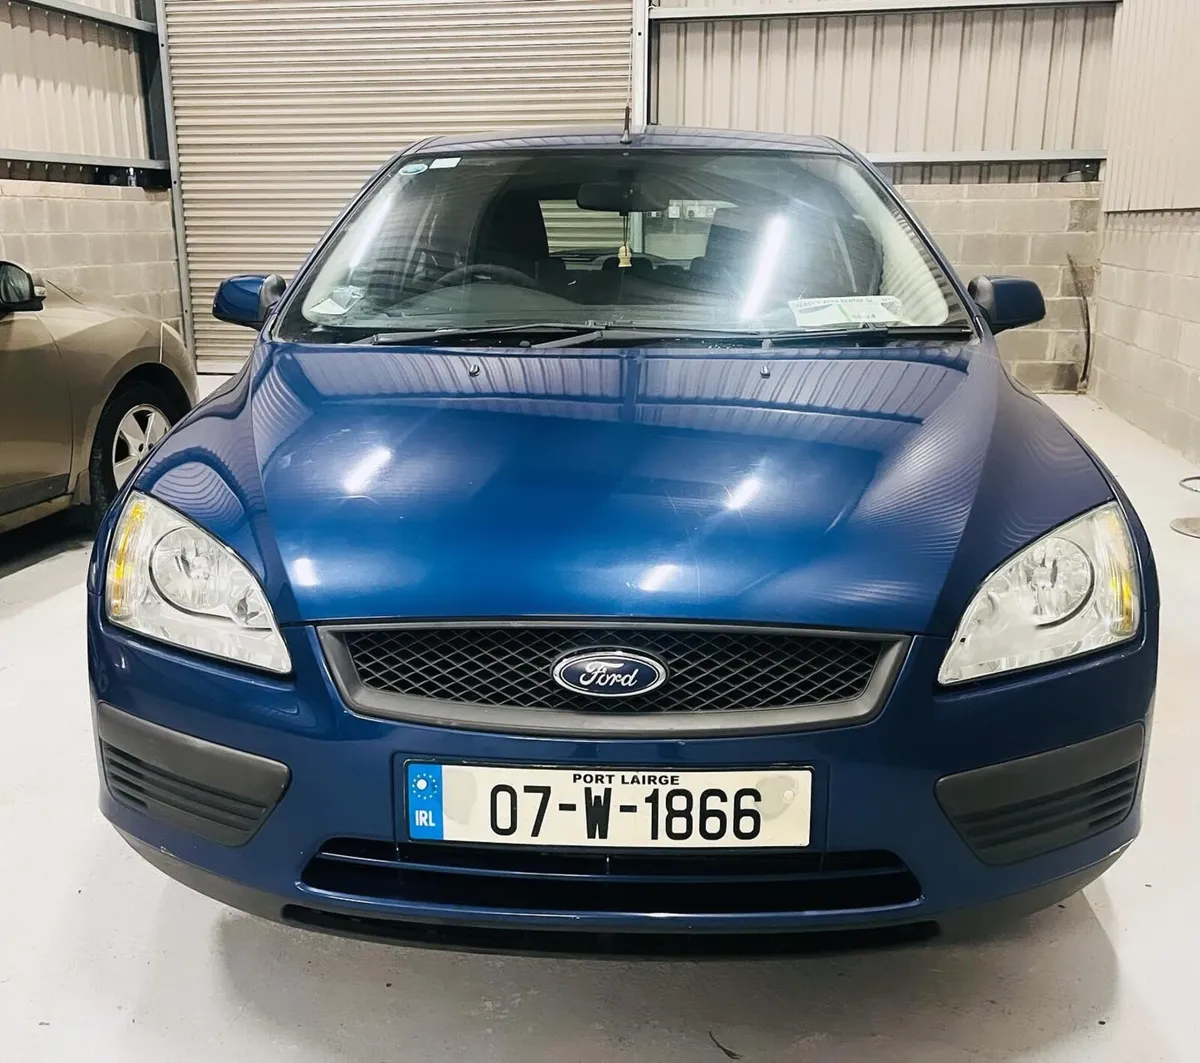 Ford focus LX Low Miles Quick Sale Nct 04/24